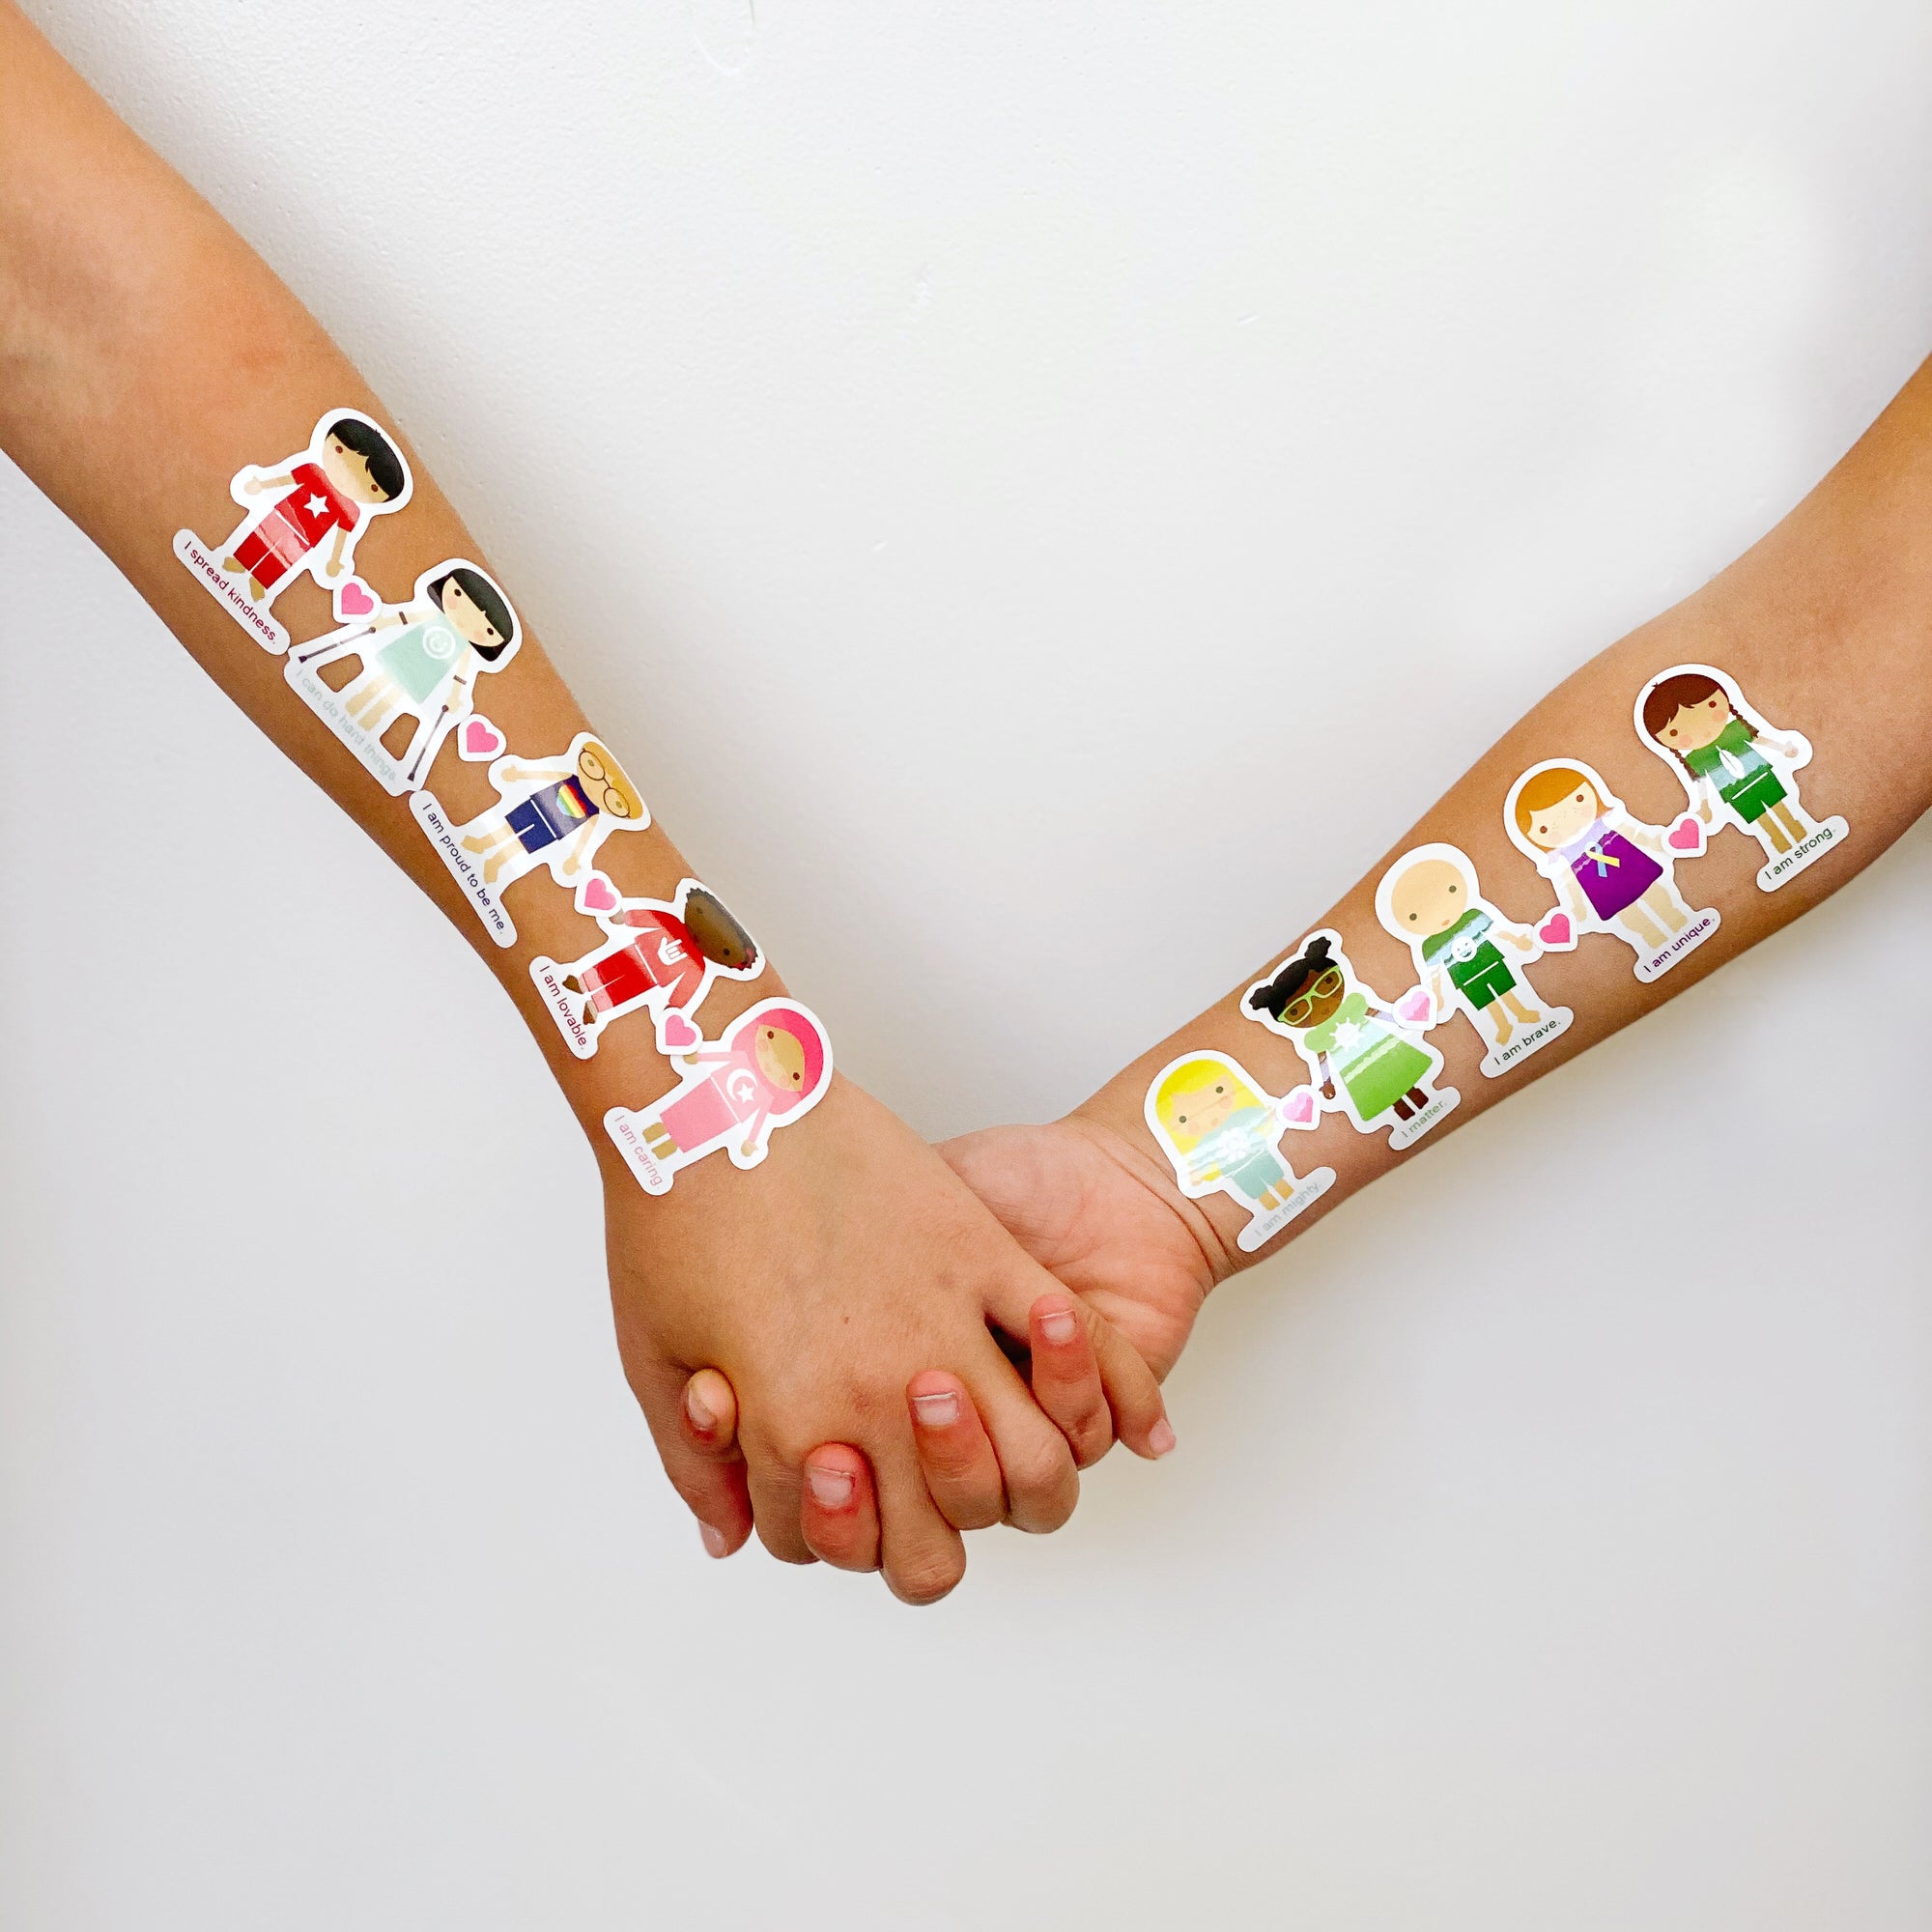 Two children holding hands with Dylbug Harmony stickers on their arms